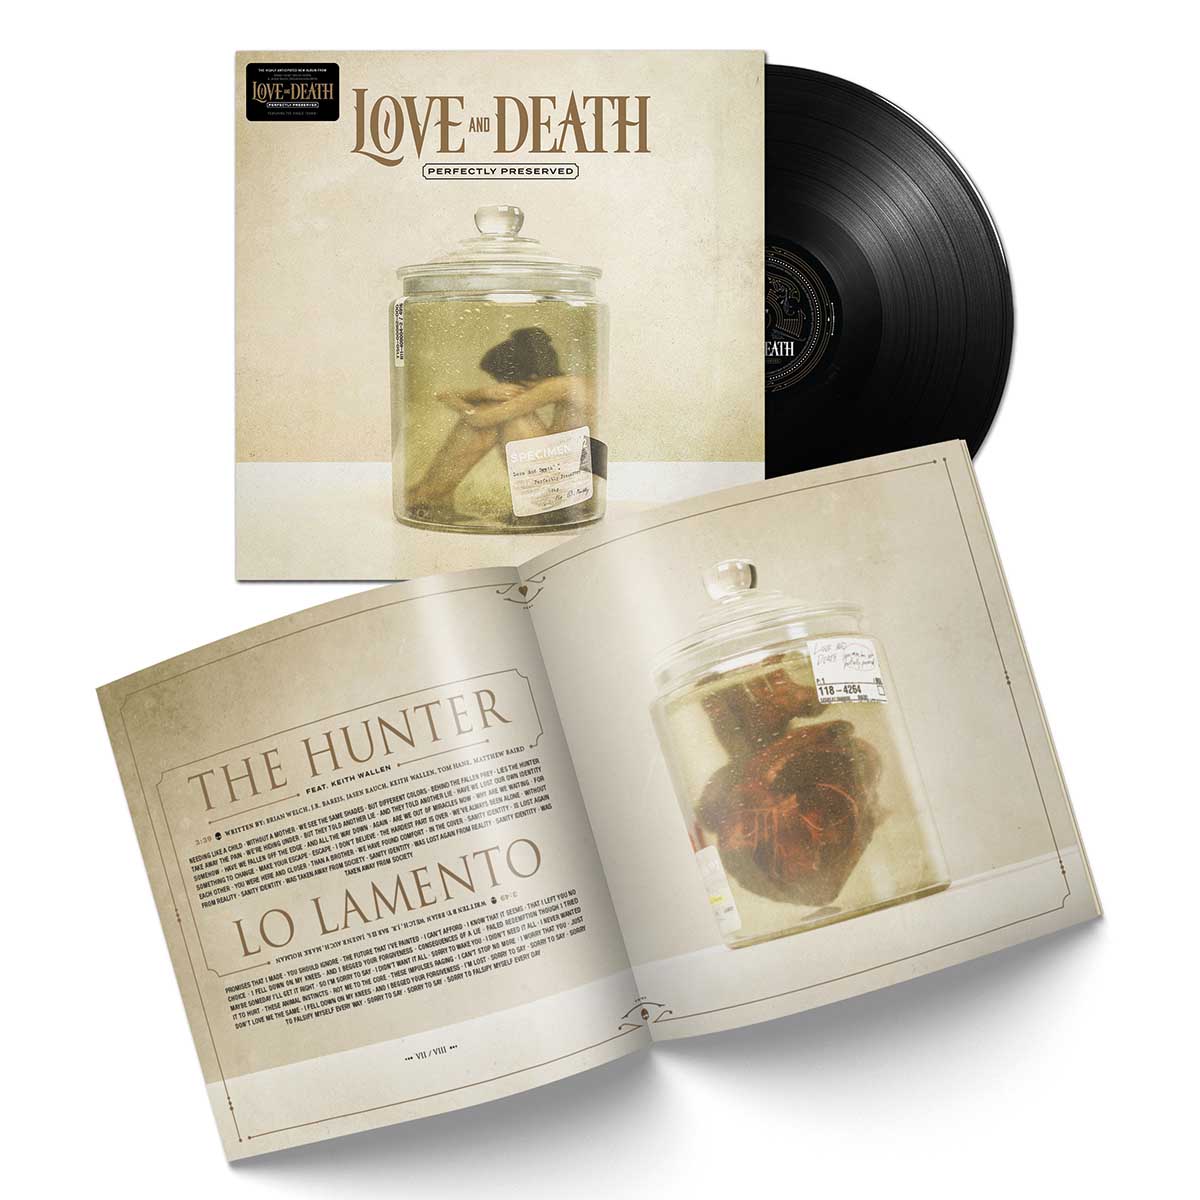 Love And Death "Perfectly Preserved" Black Vinyl